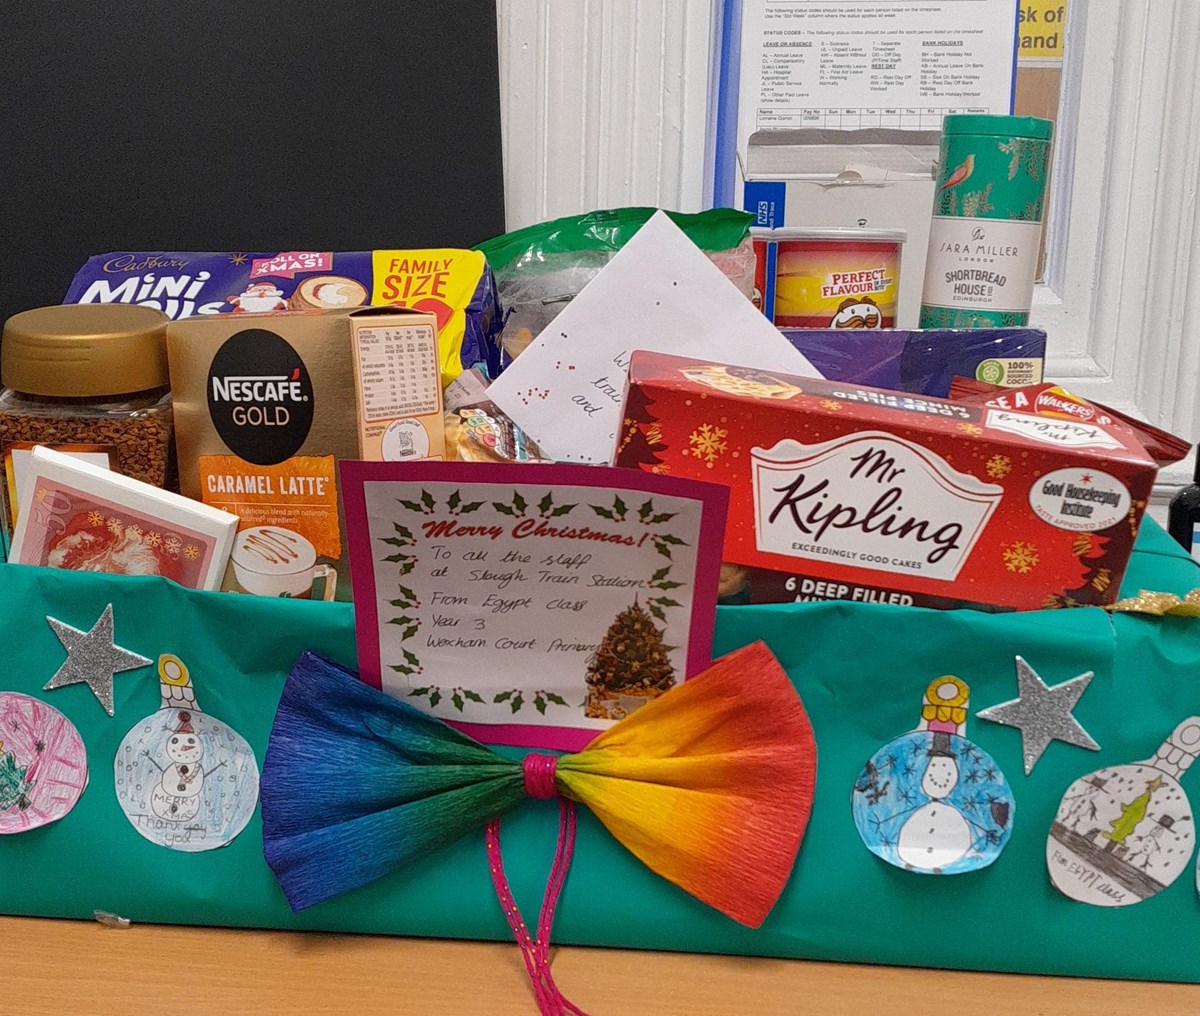 The Christmas hamper from Egypt Class